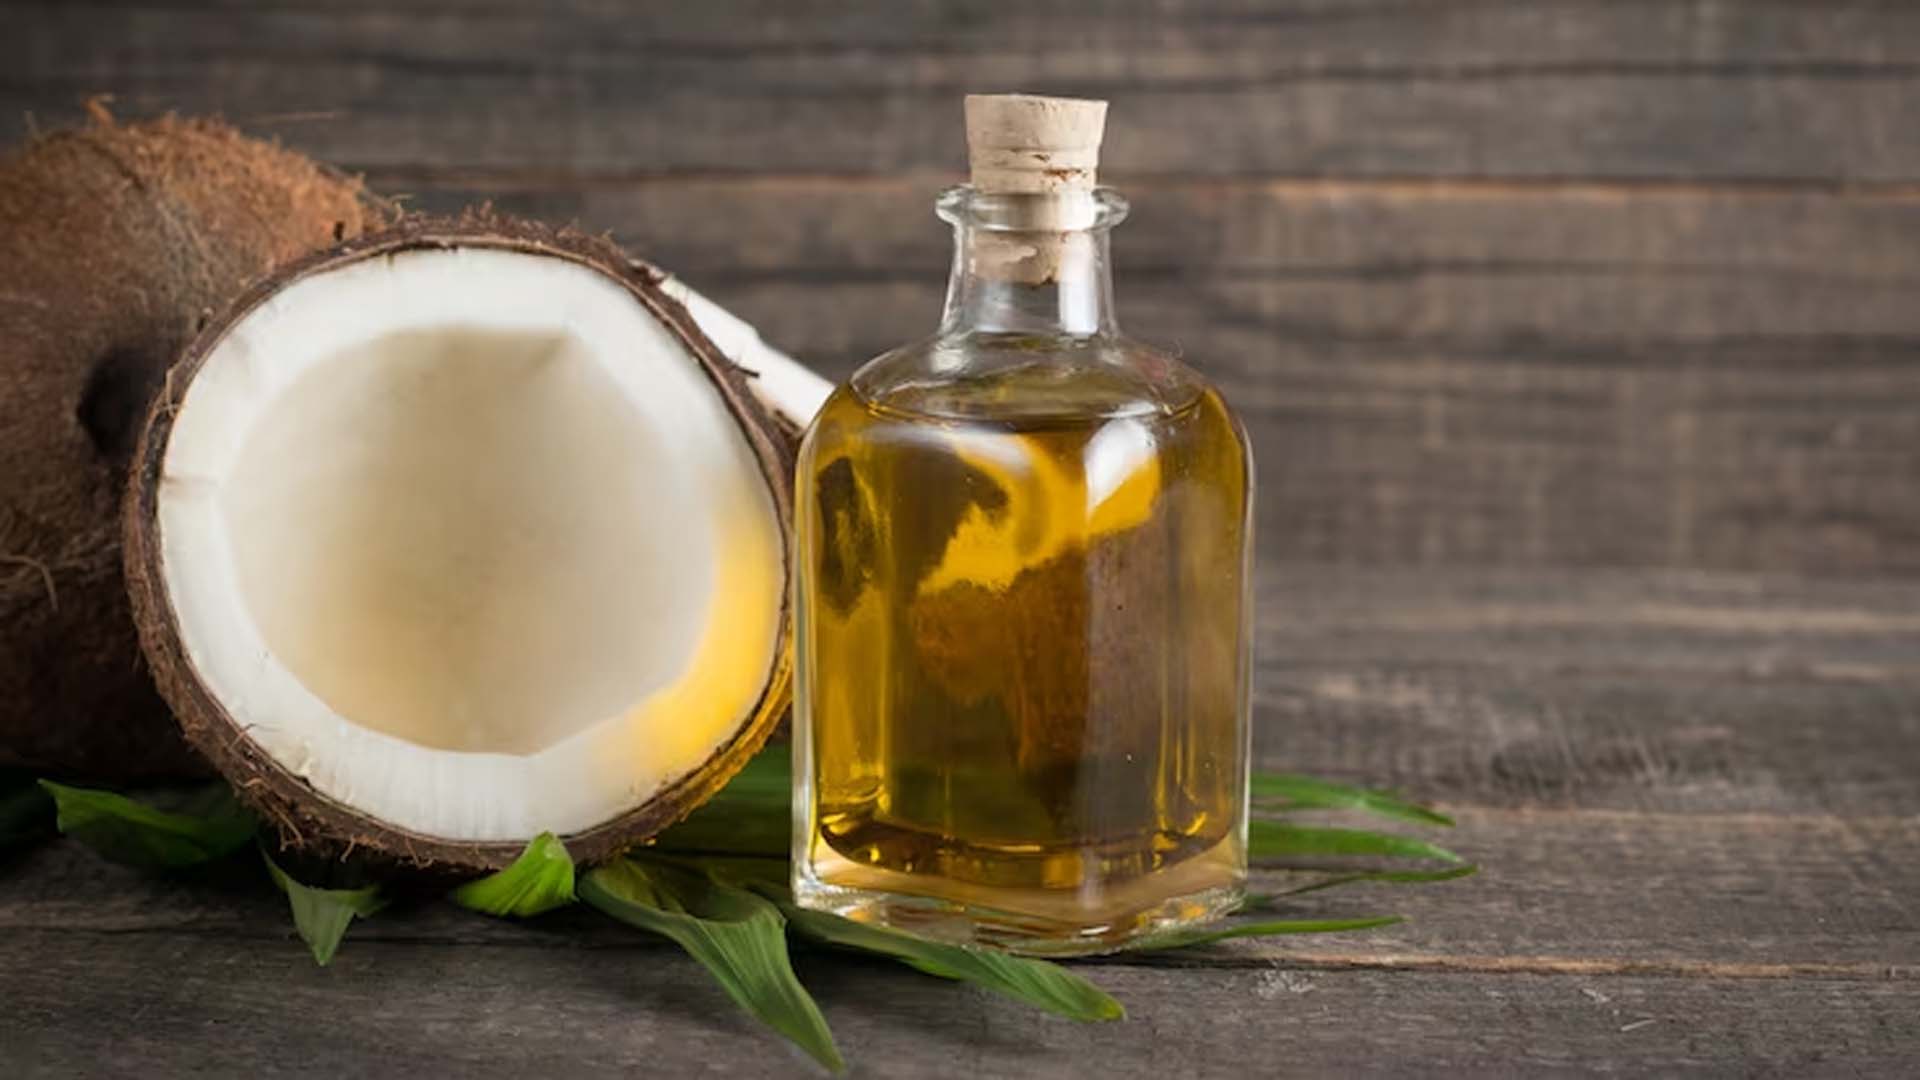 Does Heating Coconut Oil Destroy Health Benefits?